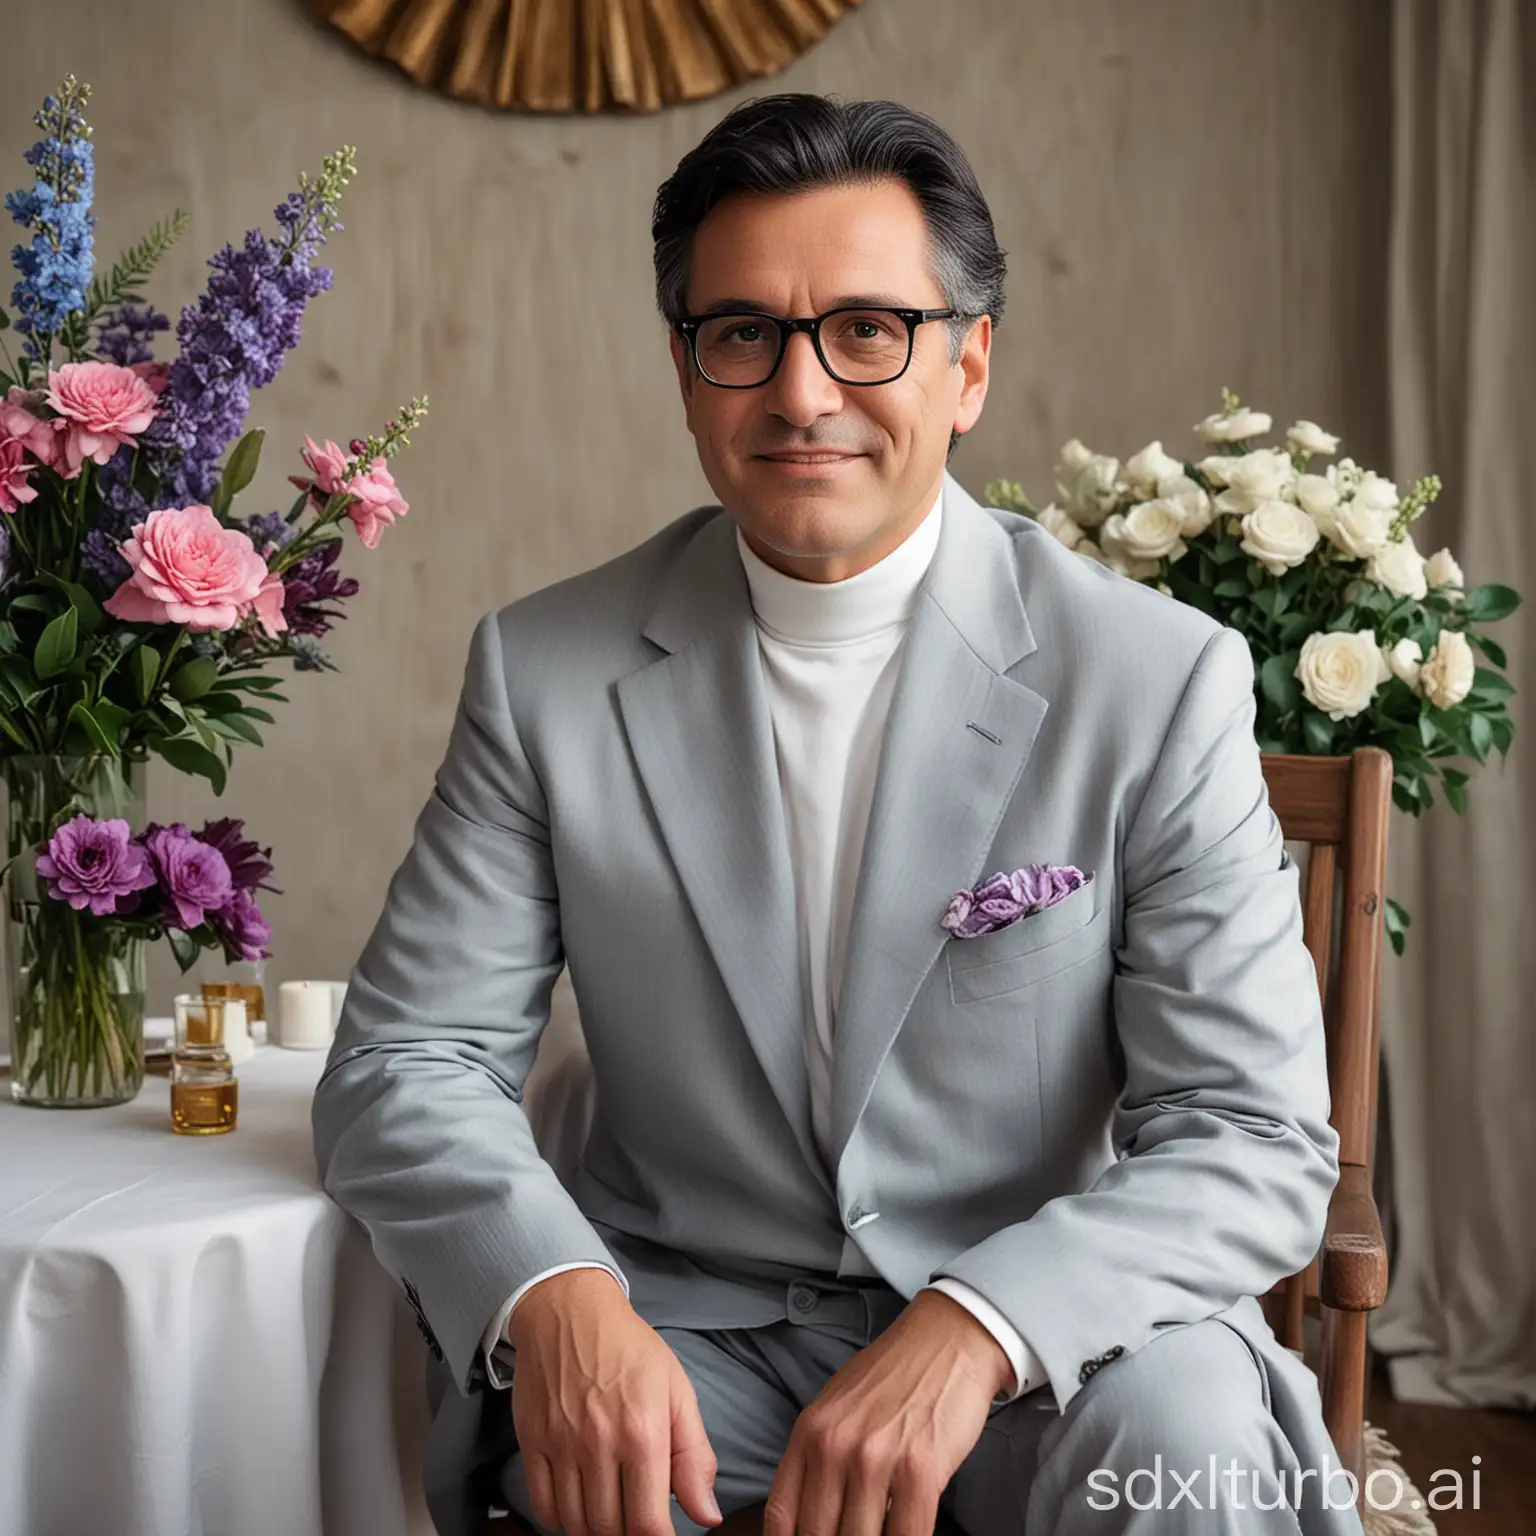 MiddleAged-Man-in-Grey-Suit-Sitting-on-Chair-with-Floral-Arrangement